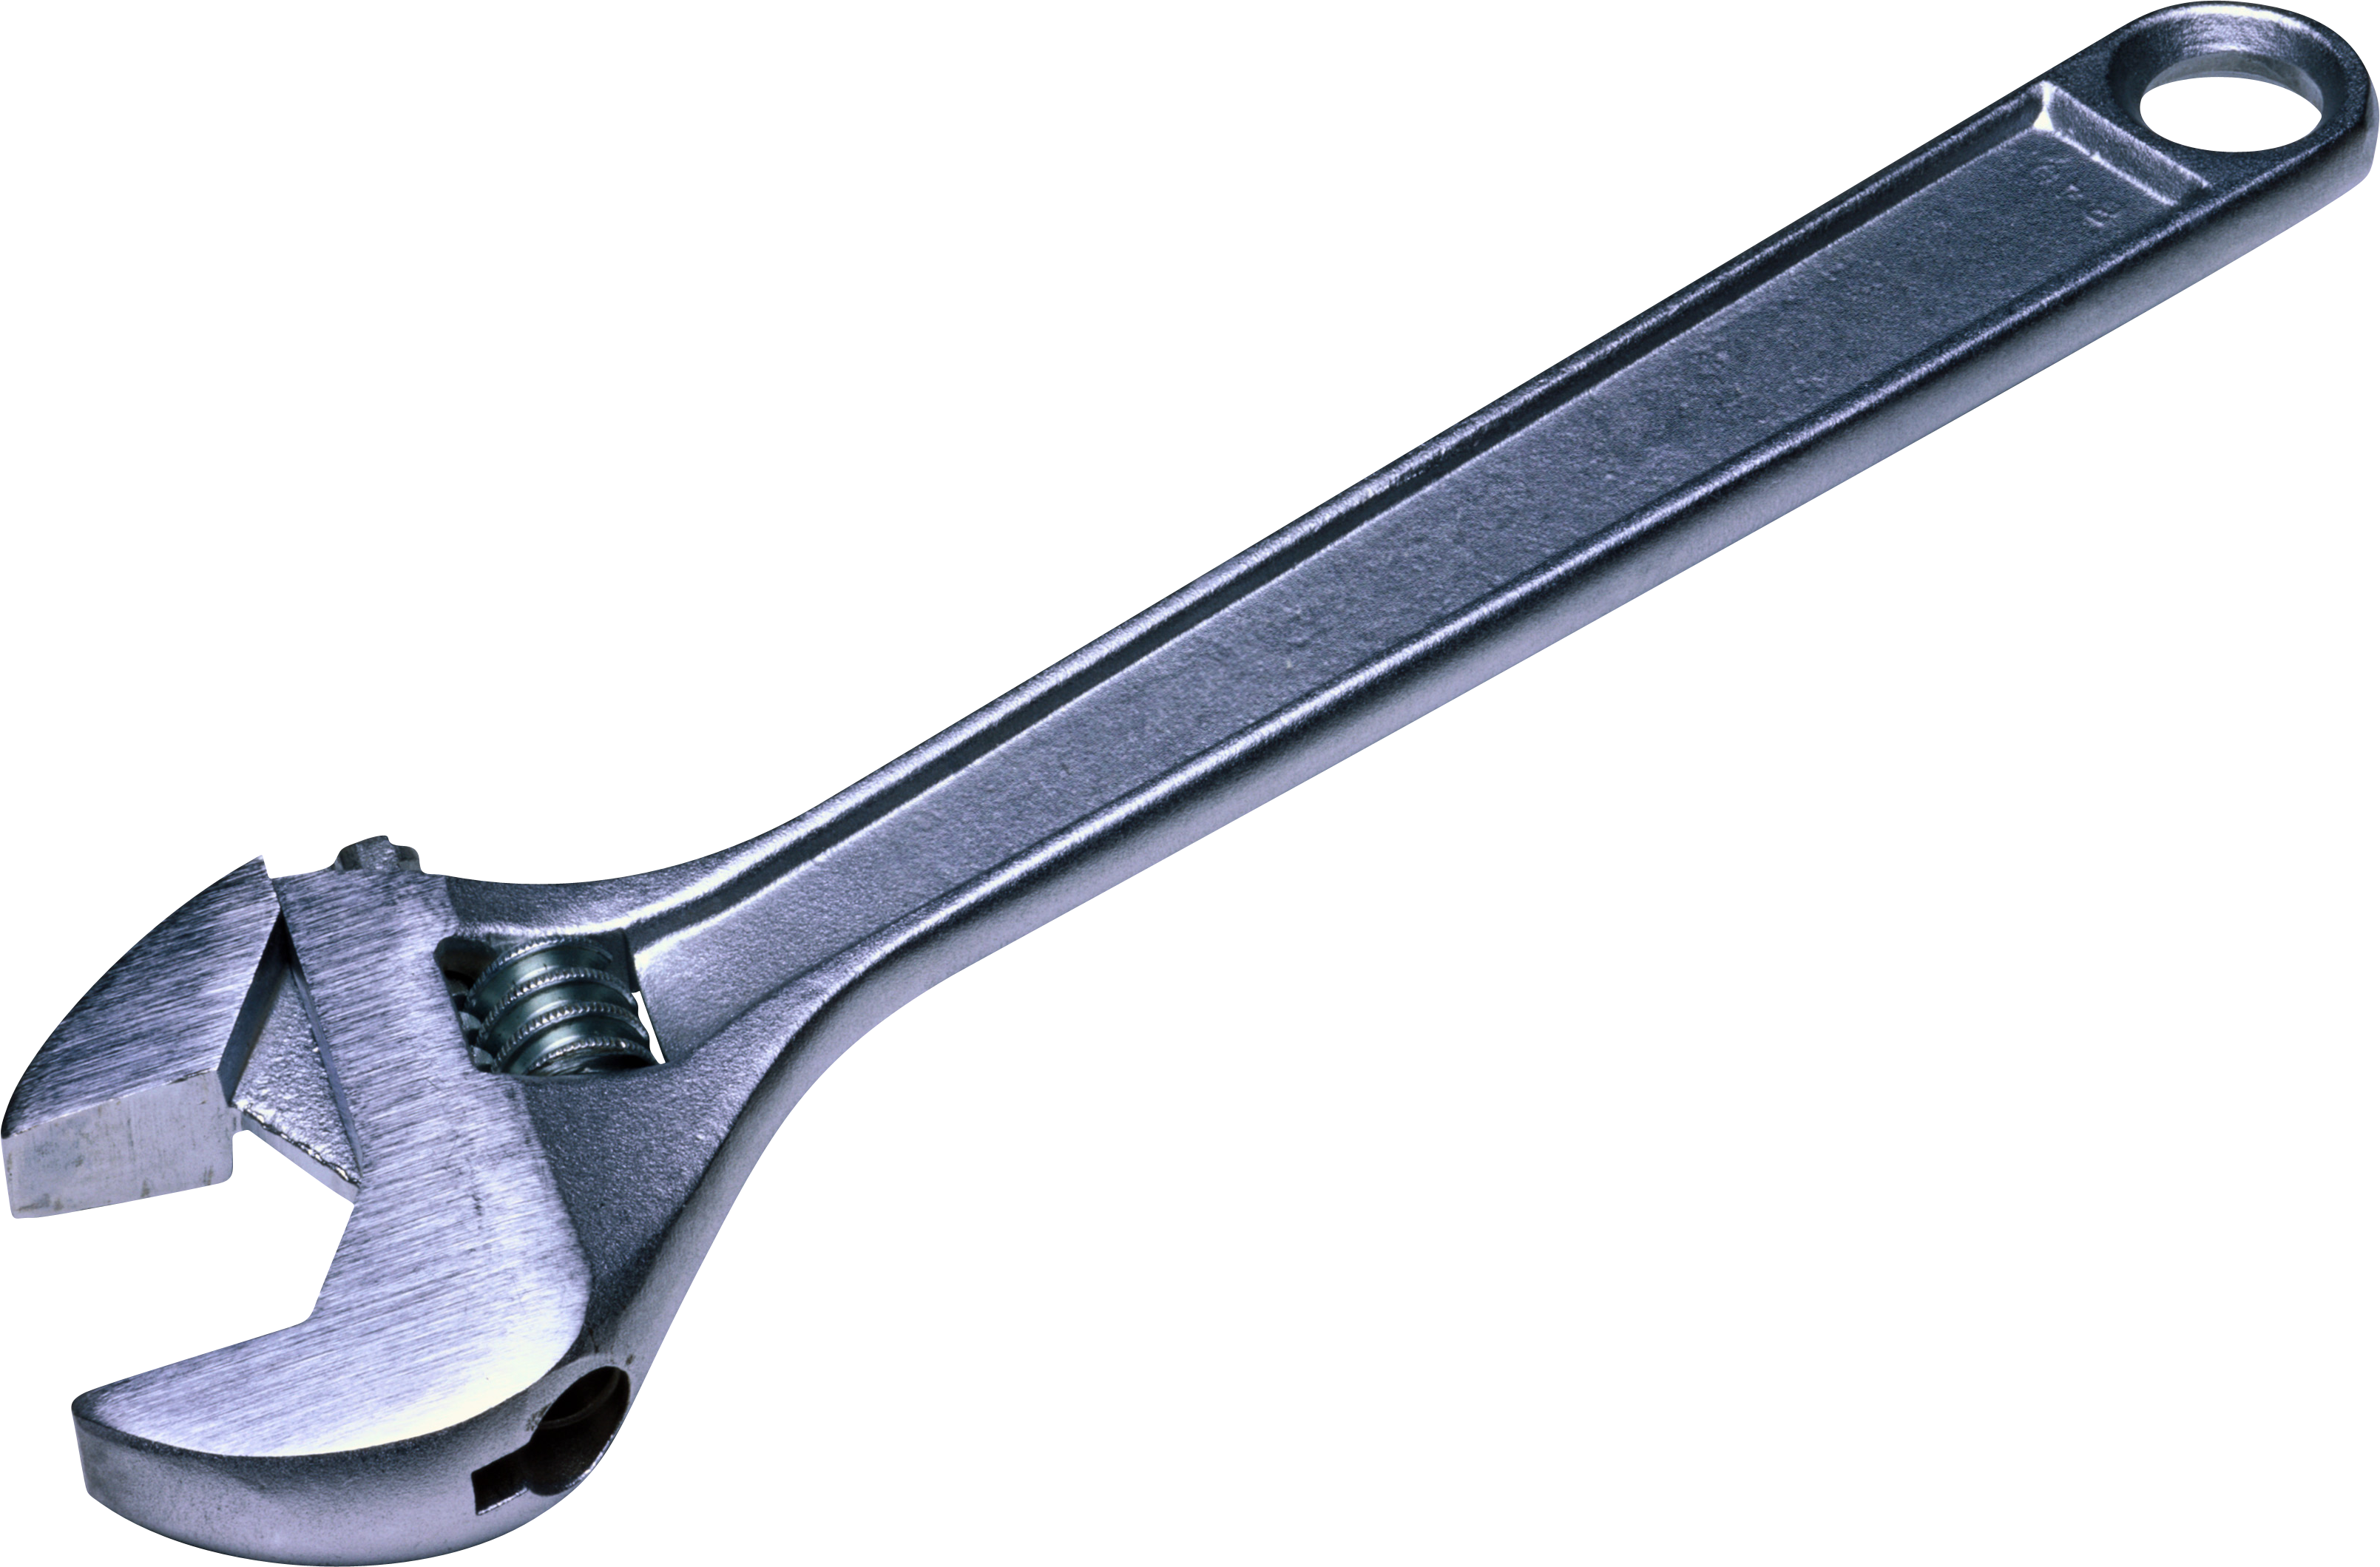 Wrench Png image #19762 - Wre